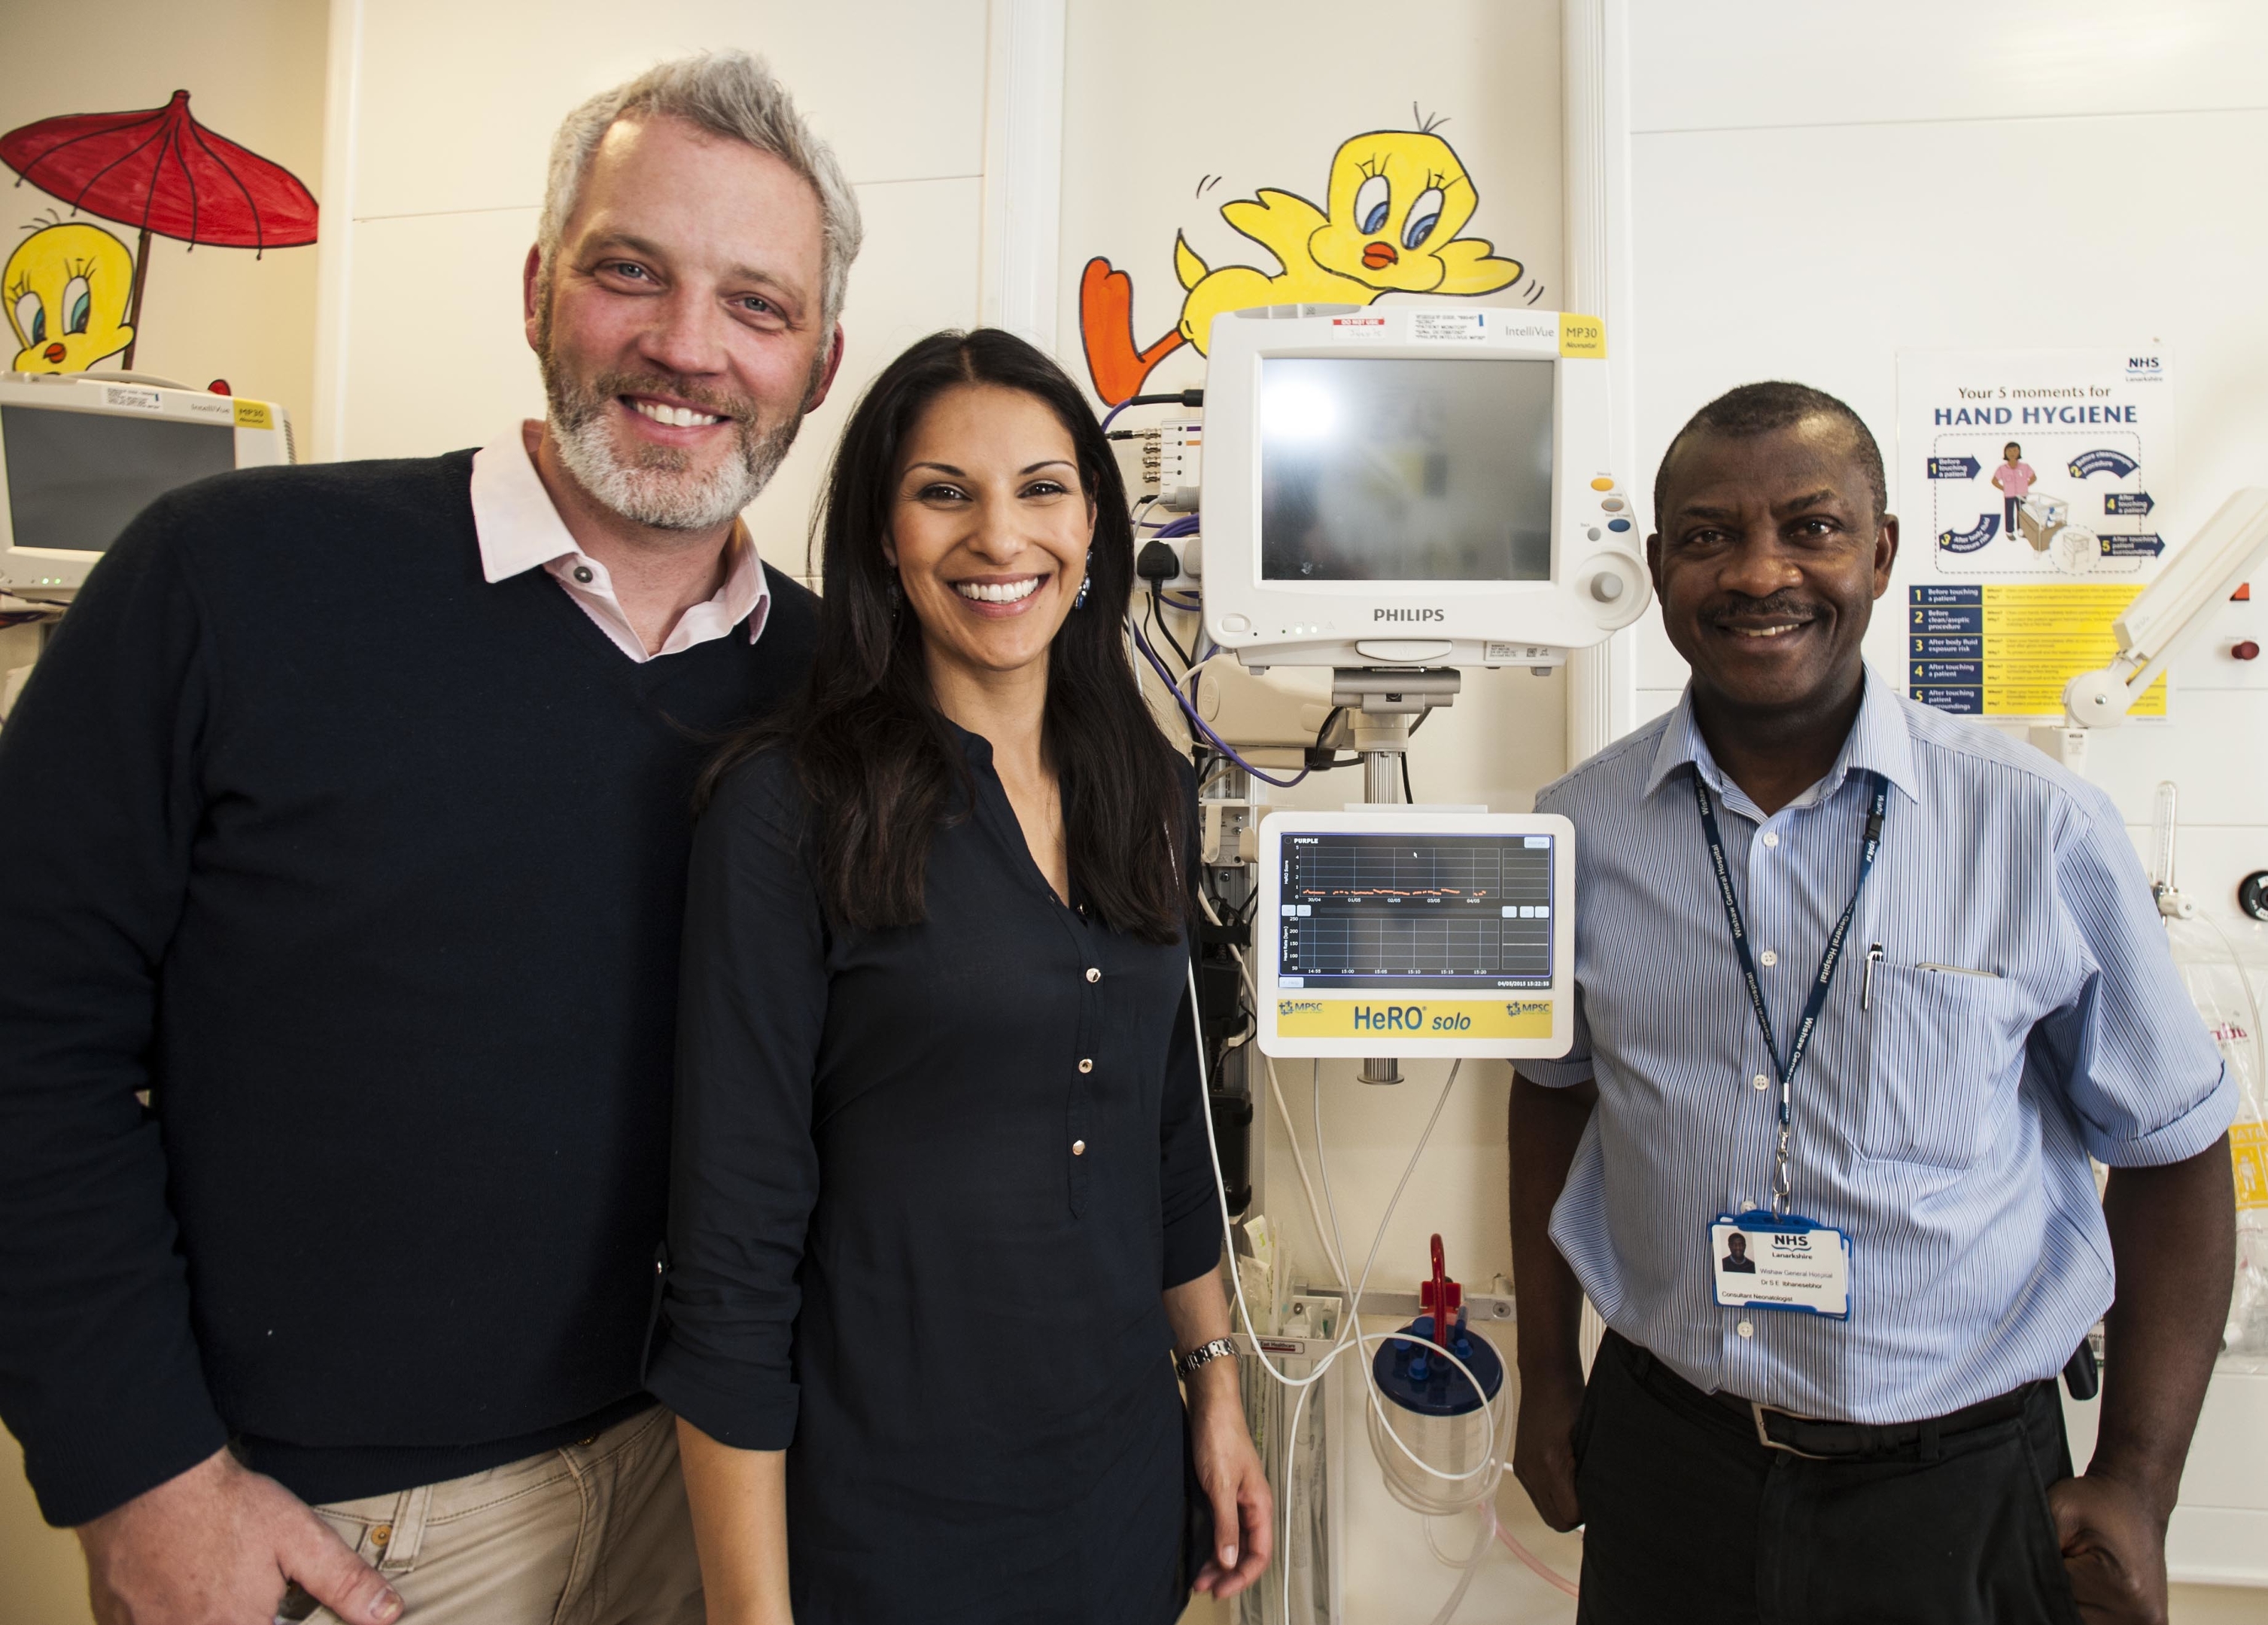 Nicola Wood and her husband Garreth Wood pictured with Dr Sam Ibhanesebhor, head of neonatal medicine at Wishaw General Hospital (right) after the couple donated Hero equipment to the Neo Natal Unit at Wishaw Hospital in 2015